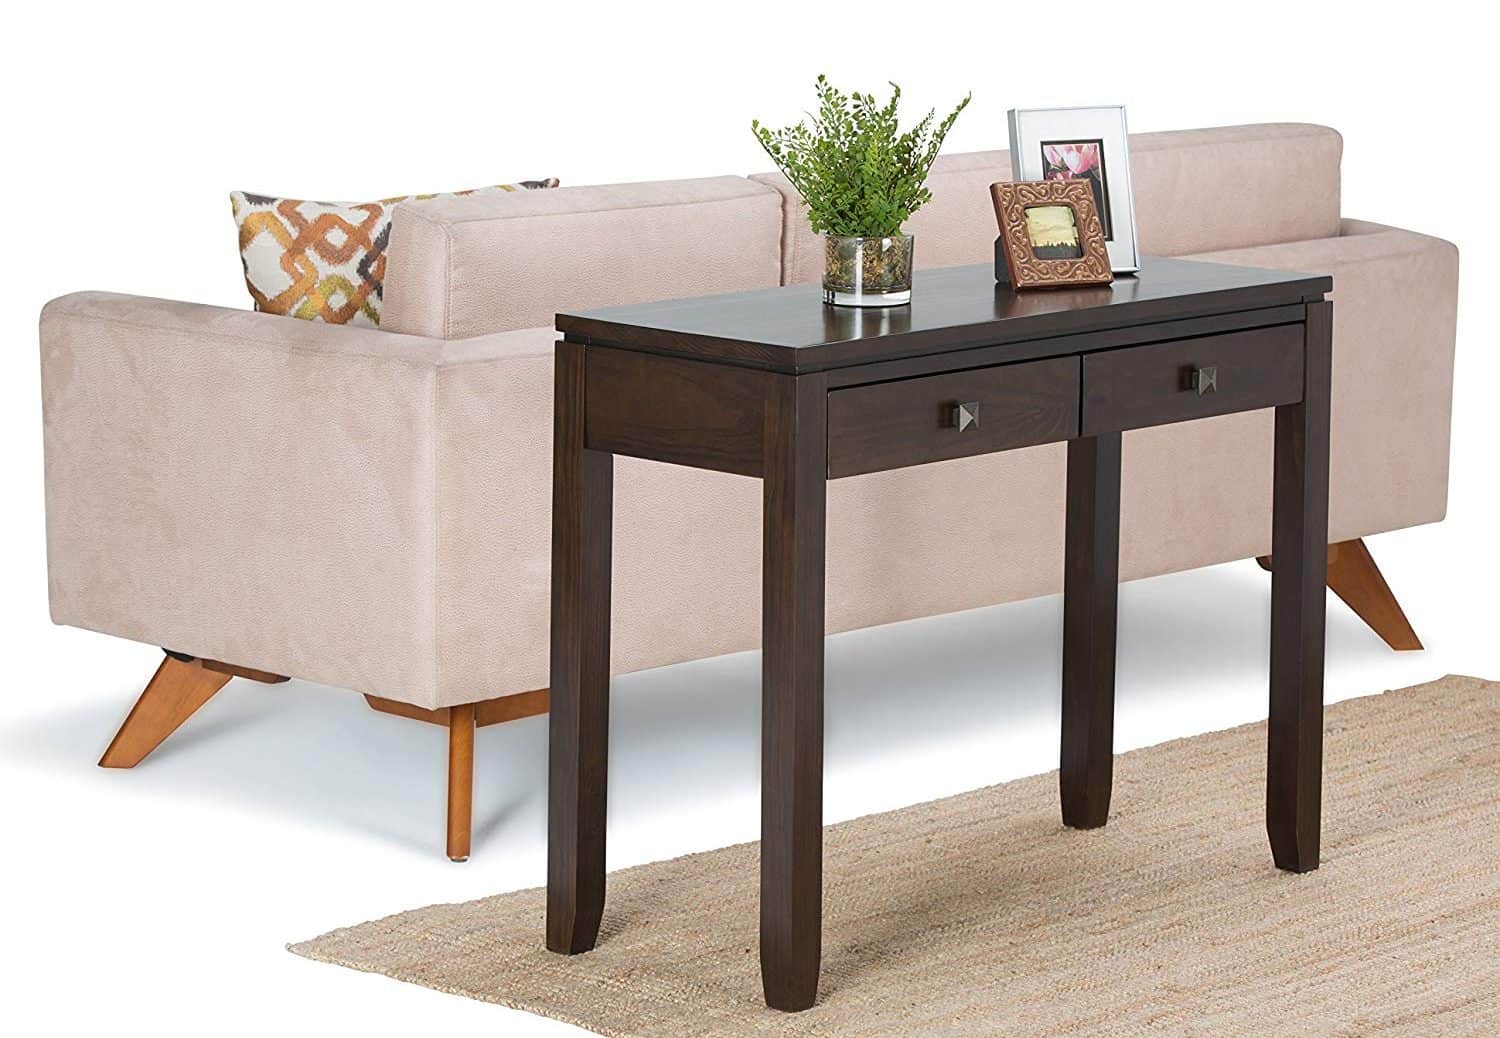 Top 34 Best Sofa Table Ideas for 2023 | How to Choose the Perfect Sofa ...